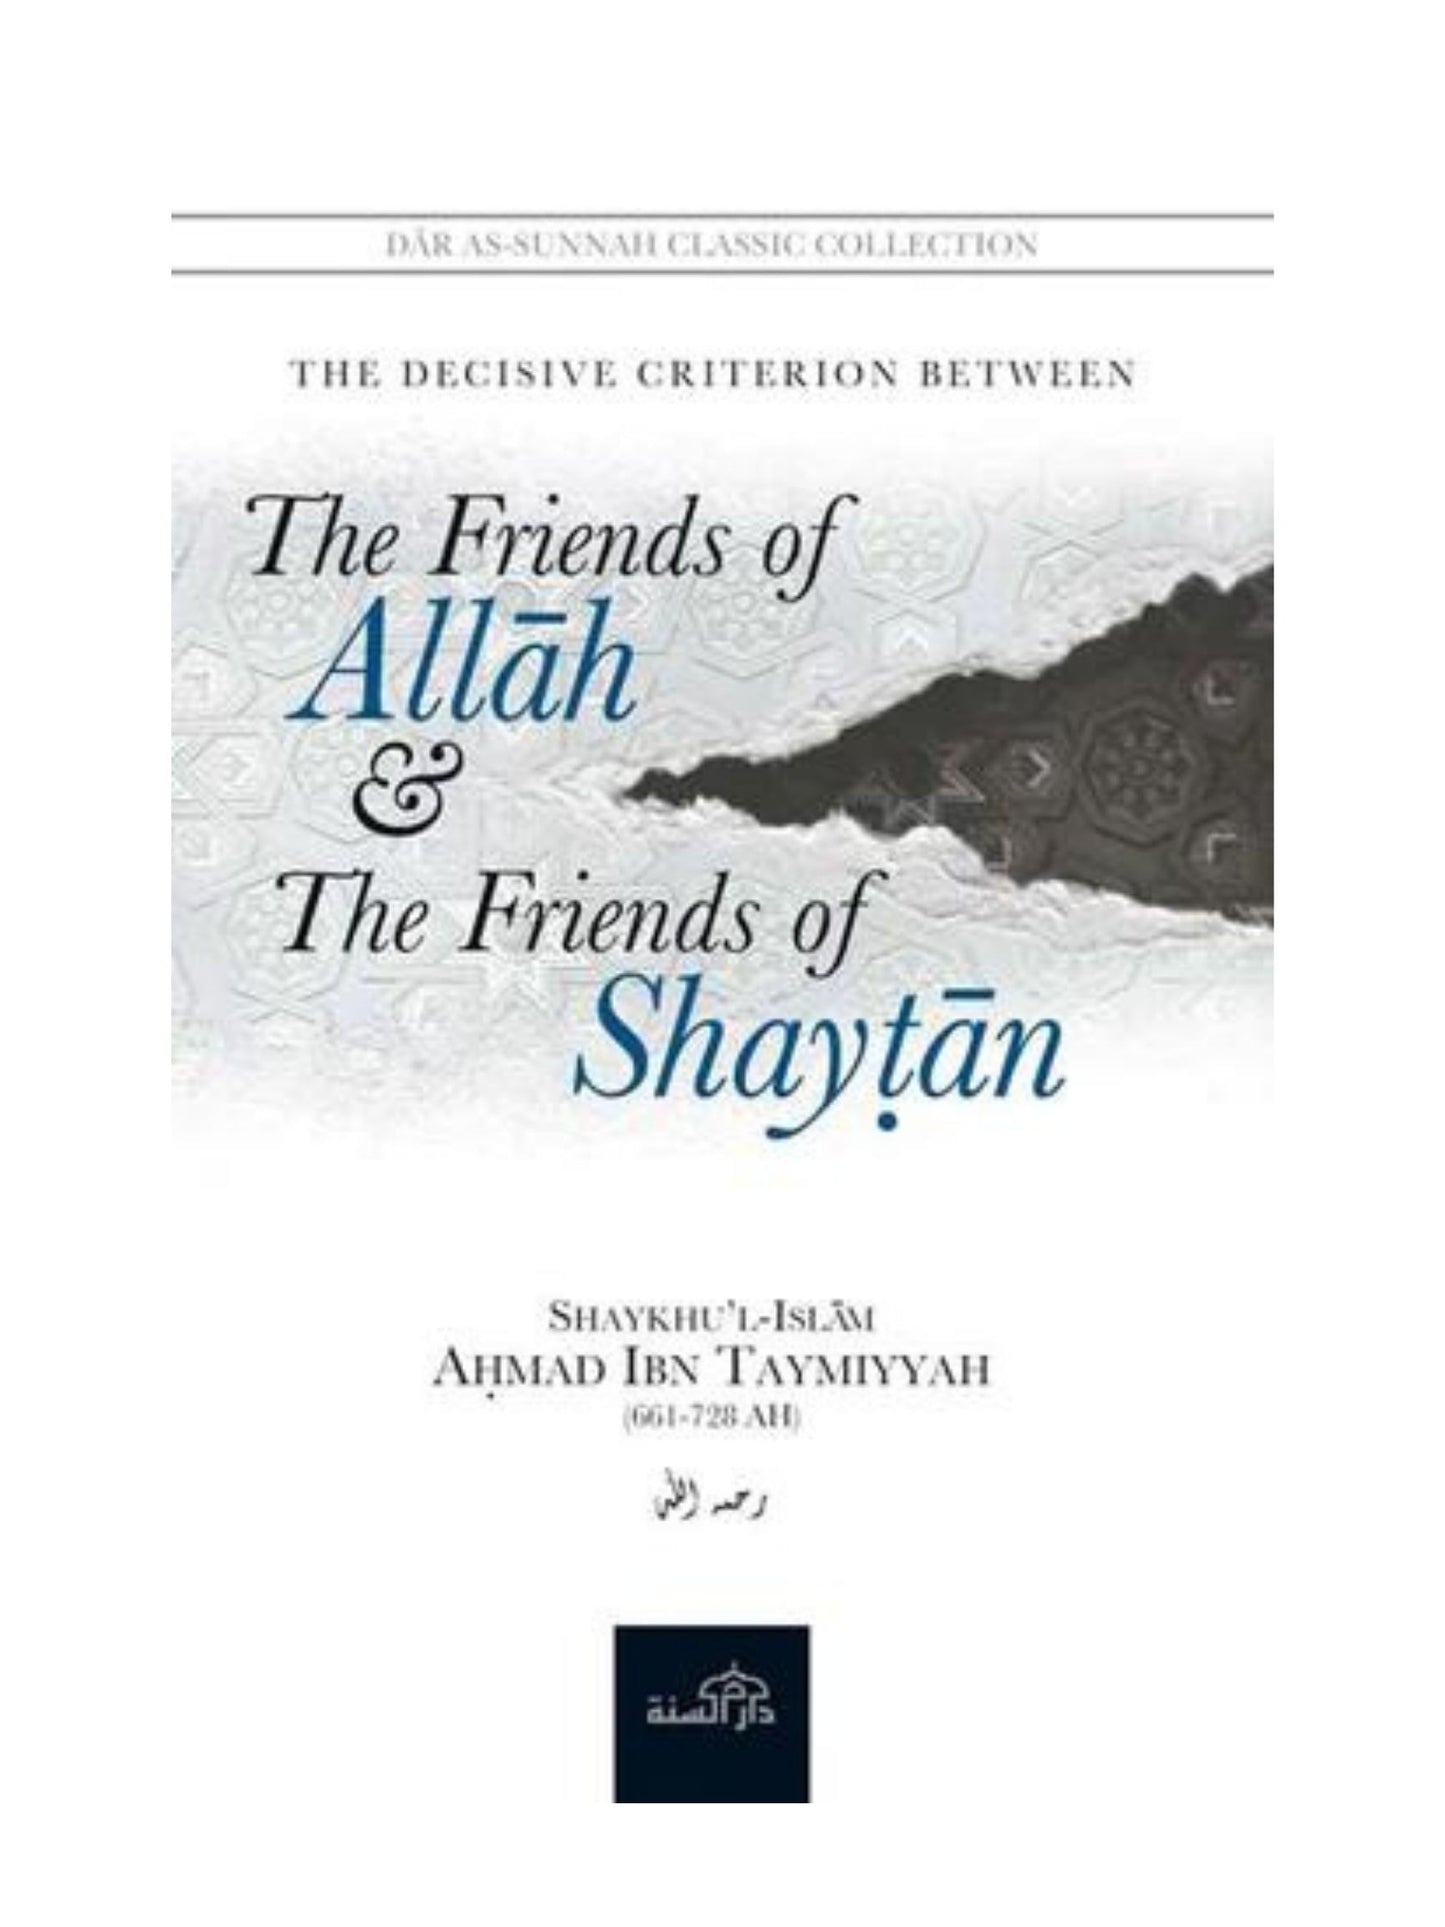 The Decisive Criterion Between the Friends of Allah & The Friends of Shaytan